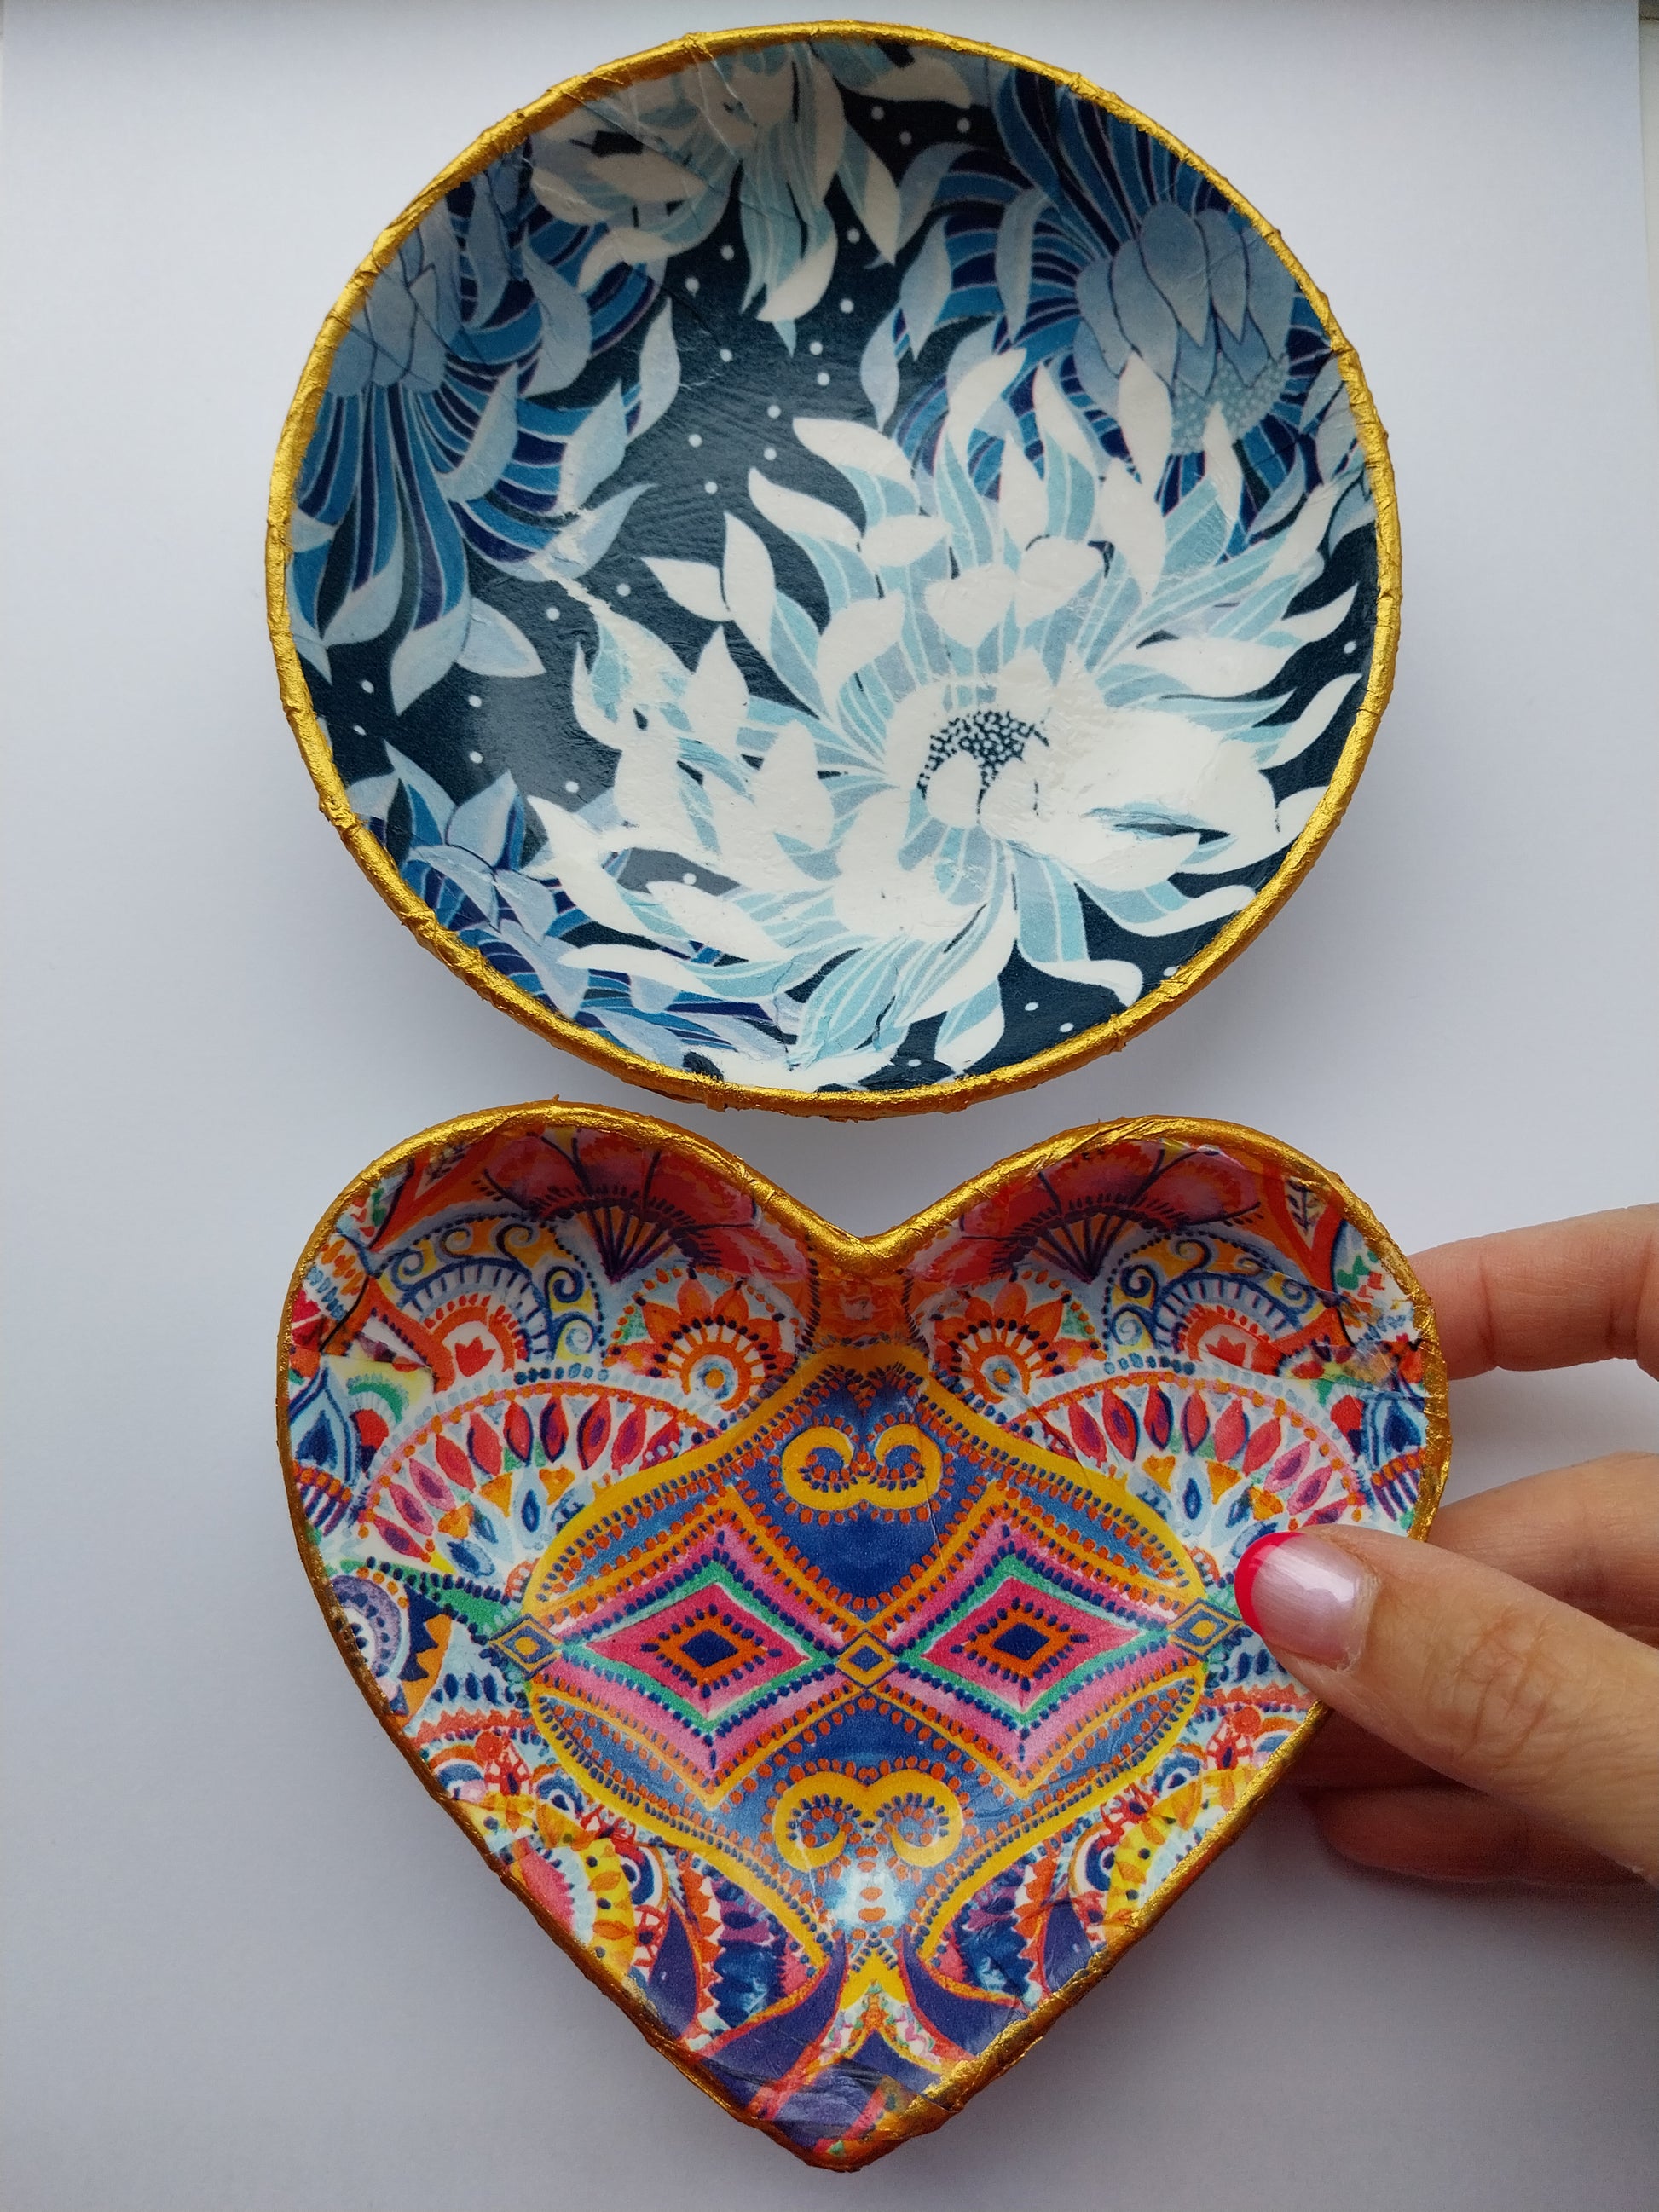 Blue and white floral trinket dish and heart shaped colourful trinket dish with gold gilt edging